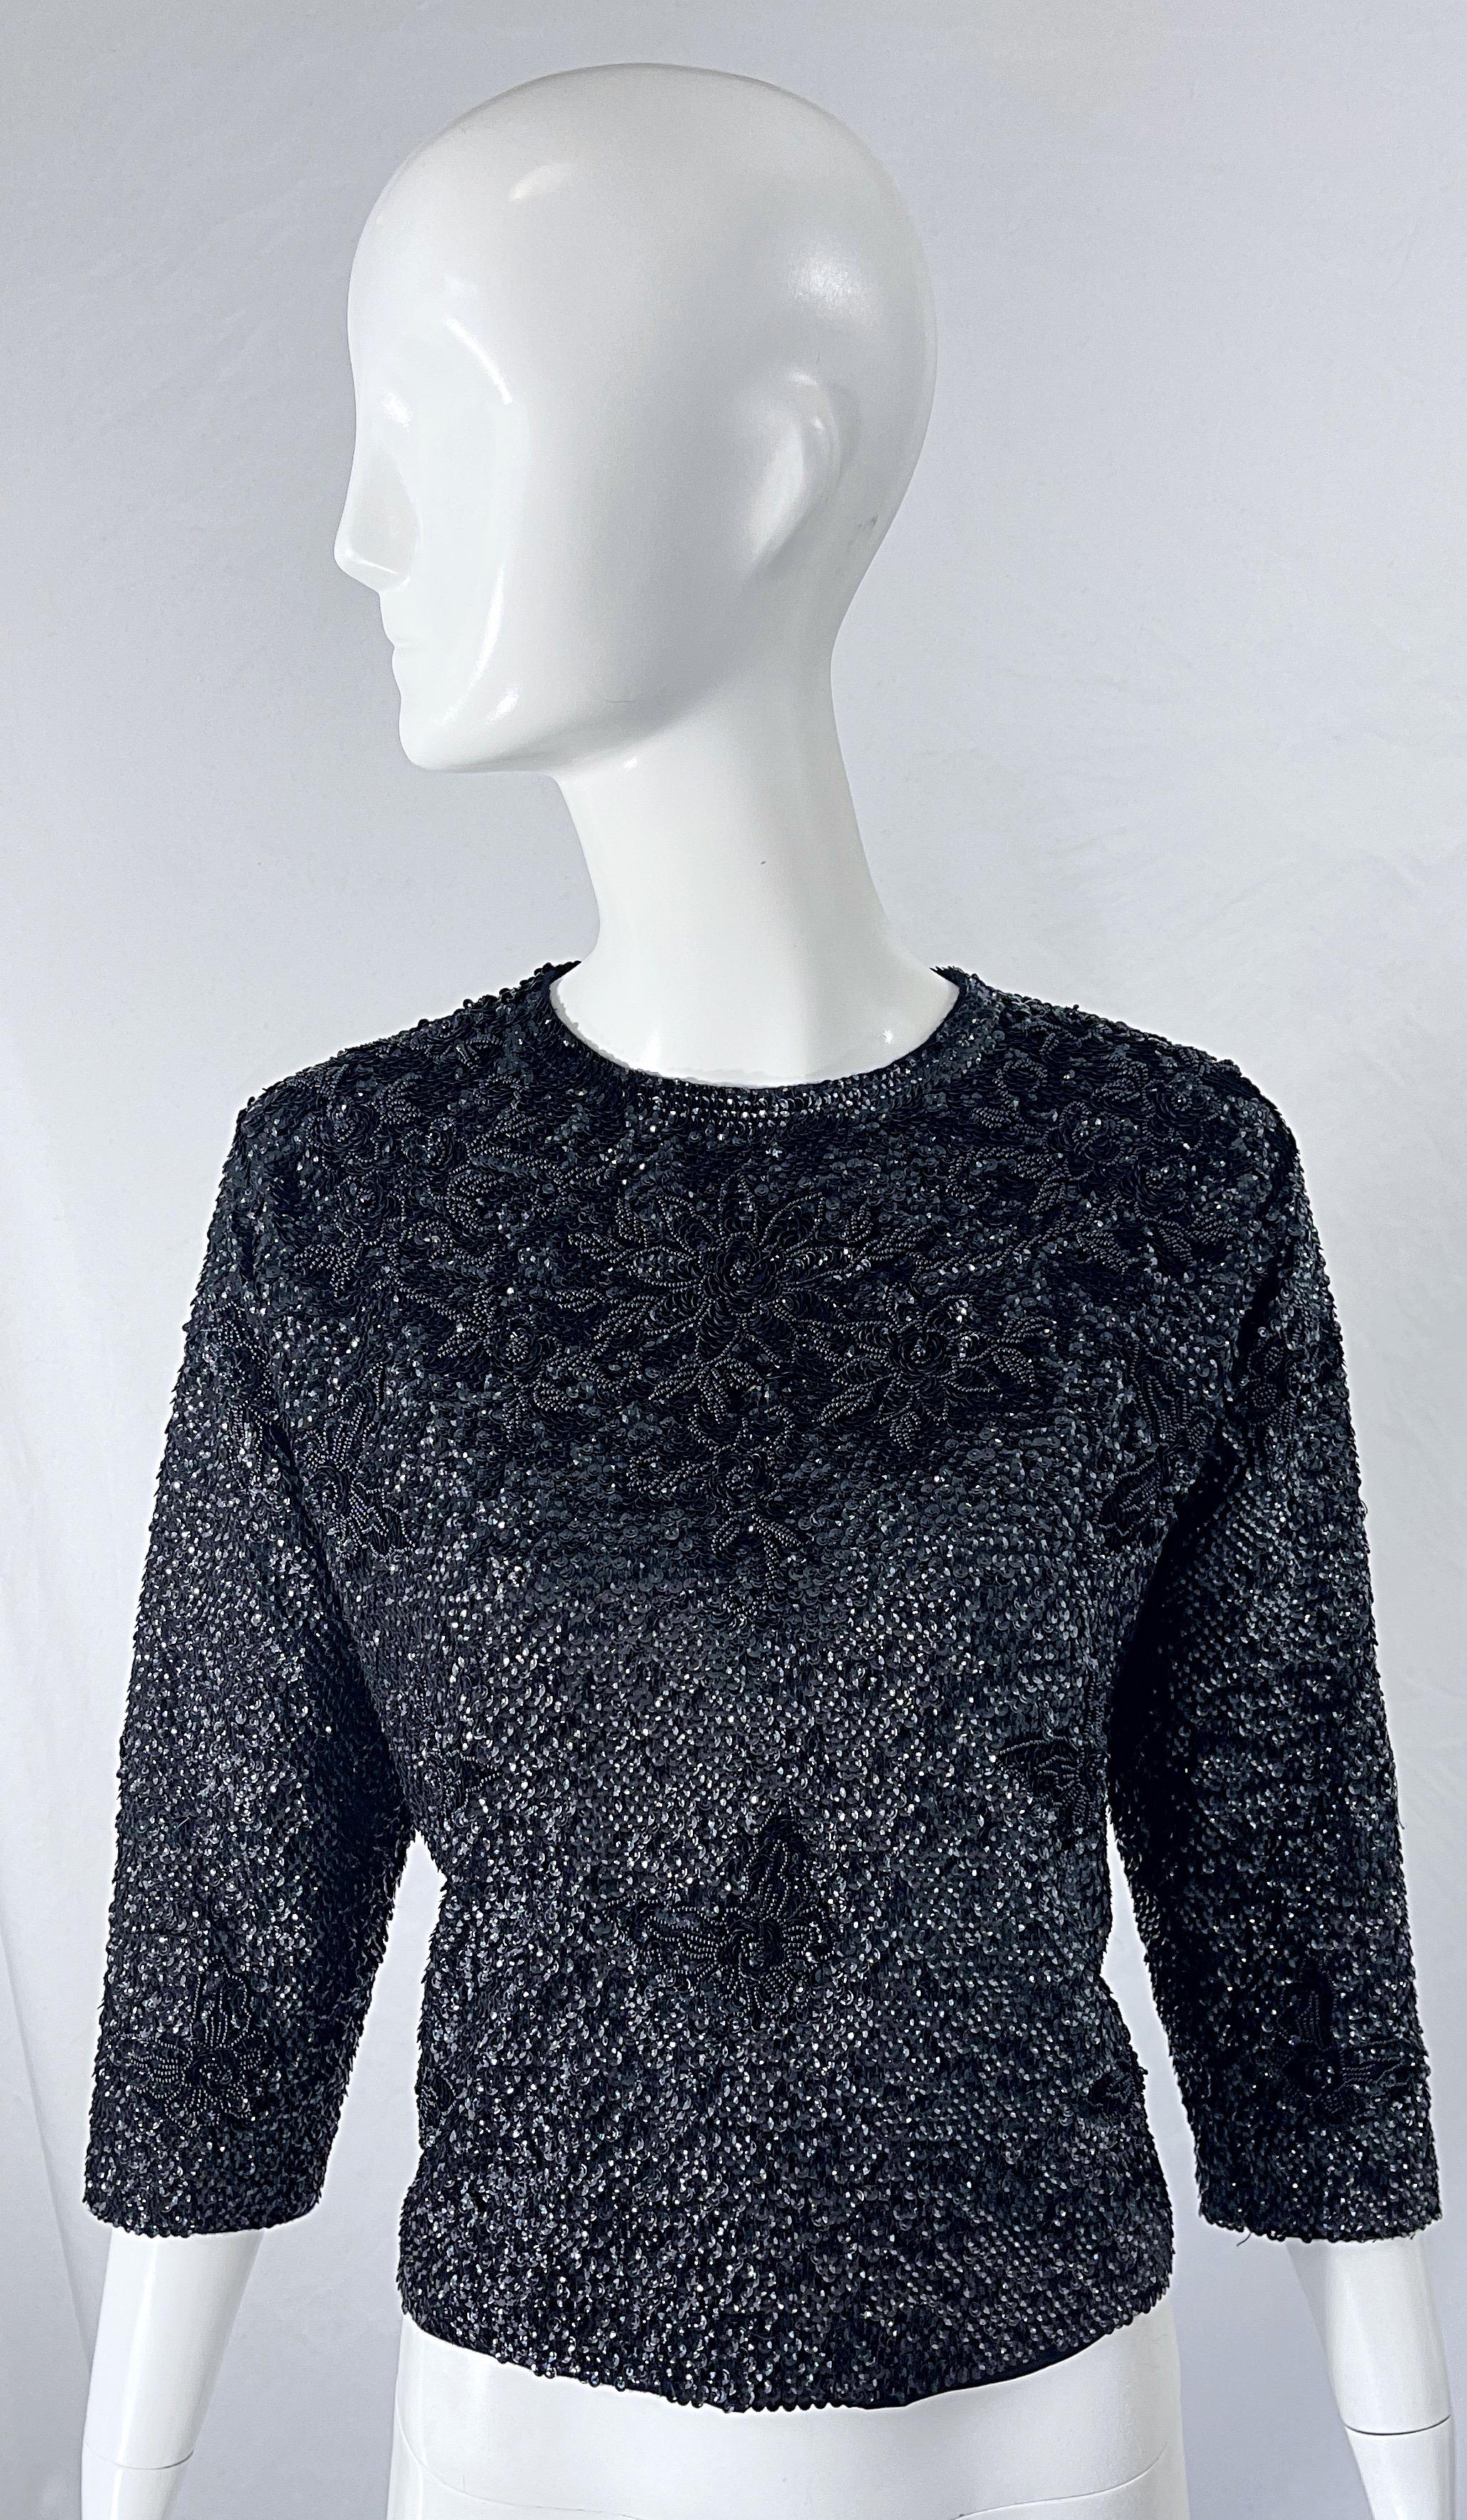 Chic early 1960s black sequin beaded 3/4 sleeves wool sweater top ! Features thousands of hand-sewn sequins and beads throughout the entire sweater. Full metal zipper up the back with hook-and-eye closure. Super soft wool has lots of stretch to it.